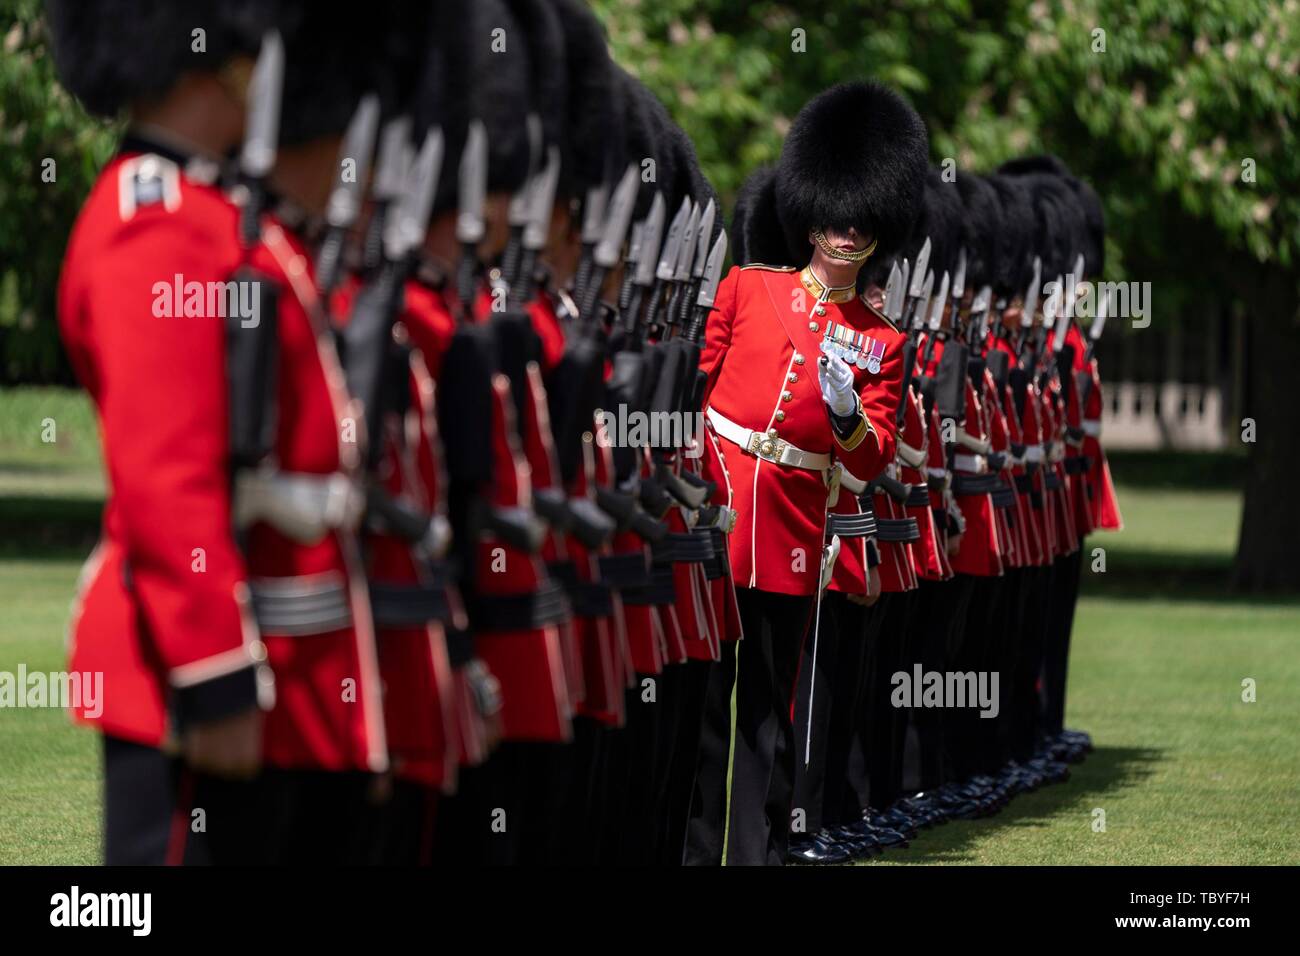 London, UK. 03rd June, 2019. The Queens Guards render a Royal Salute welcoming U.S President Donald Trump and First Lady Melania Trump during an official welcome ceremony at Buckingham Palace June 3, 2019 in London, England. Credit: Planetpix/Alamy Live News Stock Photo